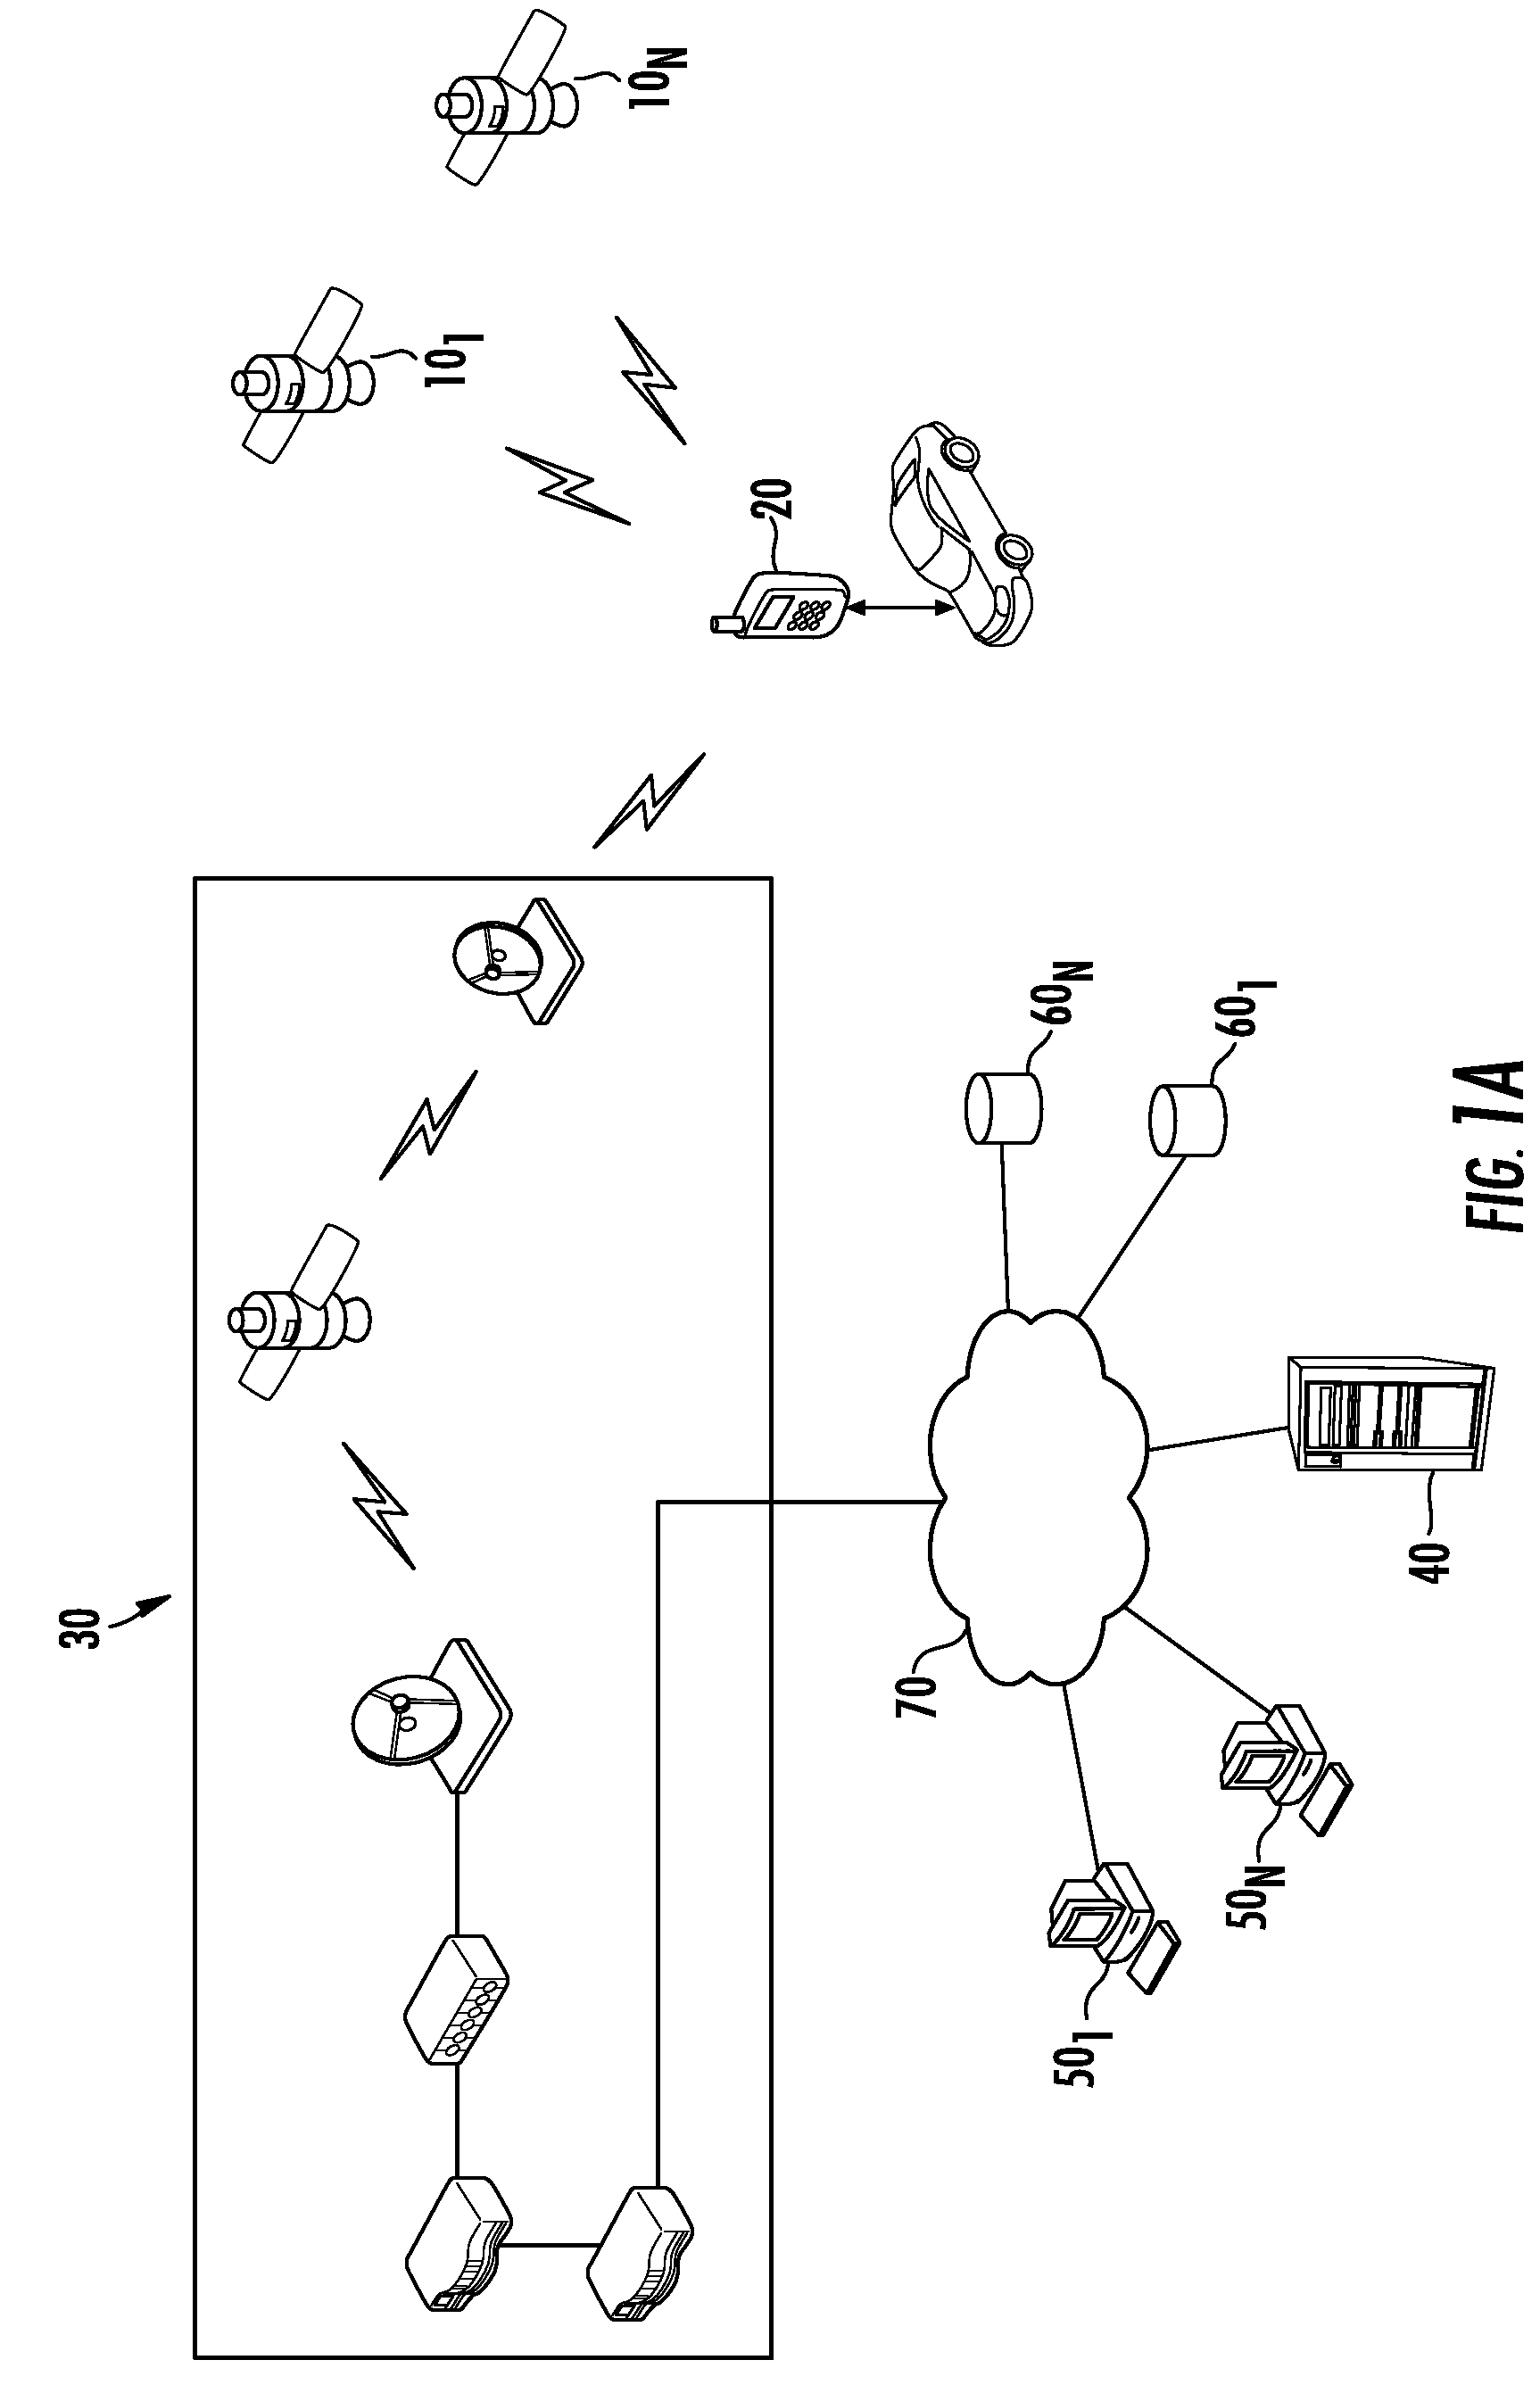 Systems and methods for remotely configuring vehicle alerts and/or controls